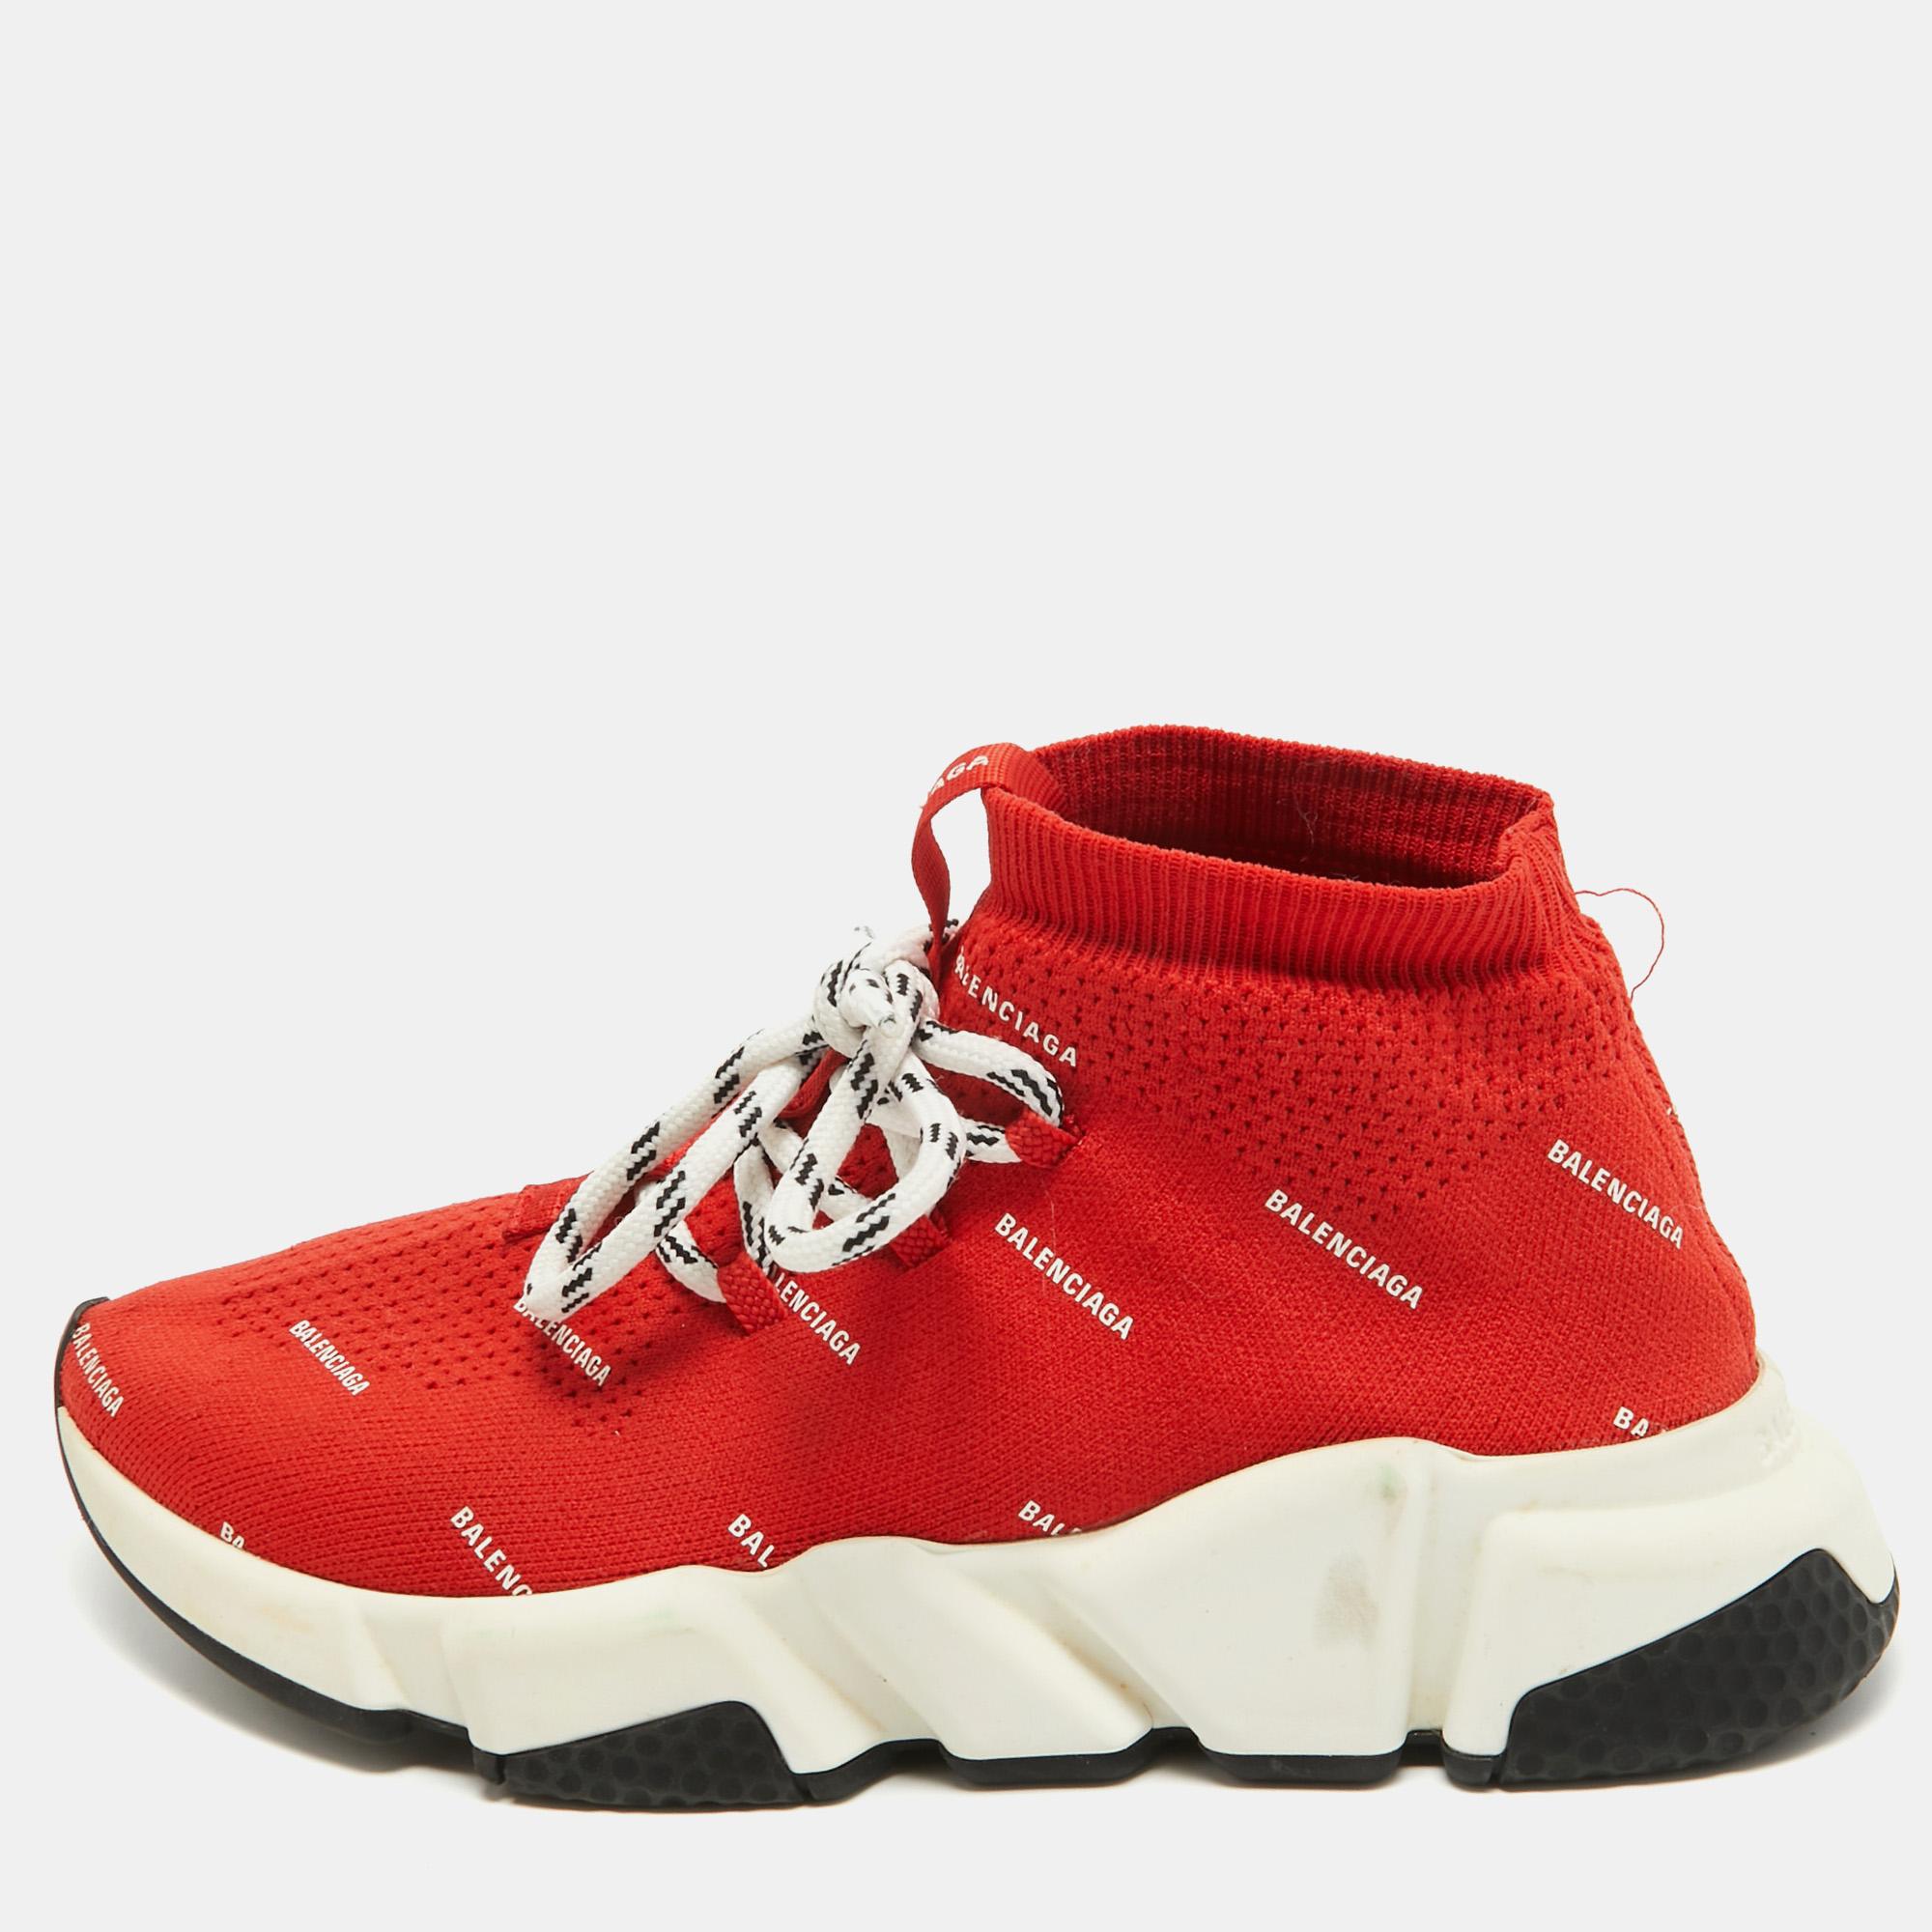 Balenciaga Red Knit Fabric Speed High Top Sneakers Size 36 For Sale 2